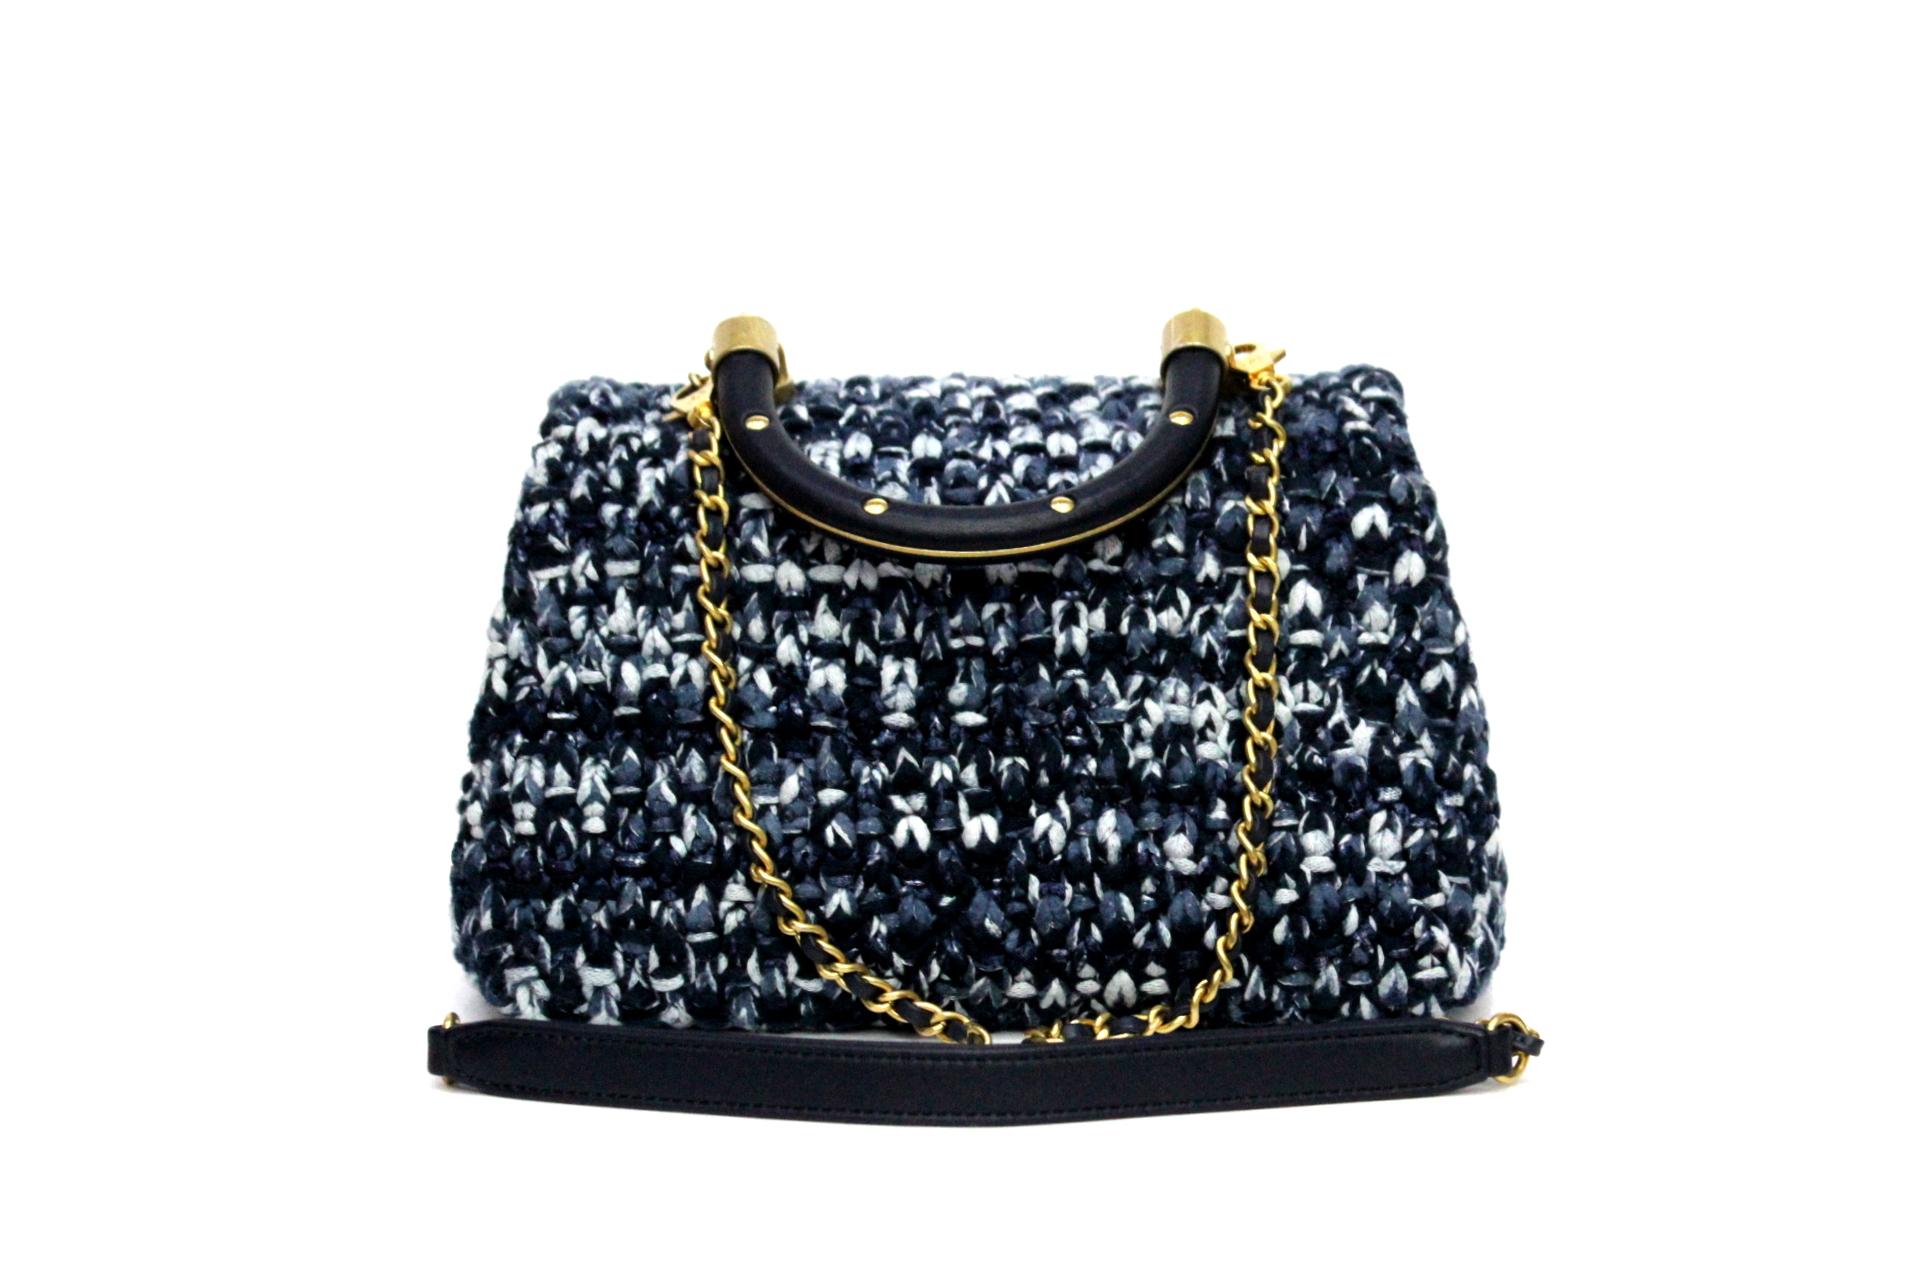 
Chanel Coco Handle model in small size. The bag is made of tweed in various shades of blue, the finishes and woven leather of the chain in a navy blue. It is carried by the handle or worn on the shoulder. The shoulder strap can be removed. Antique